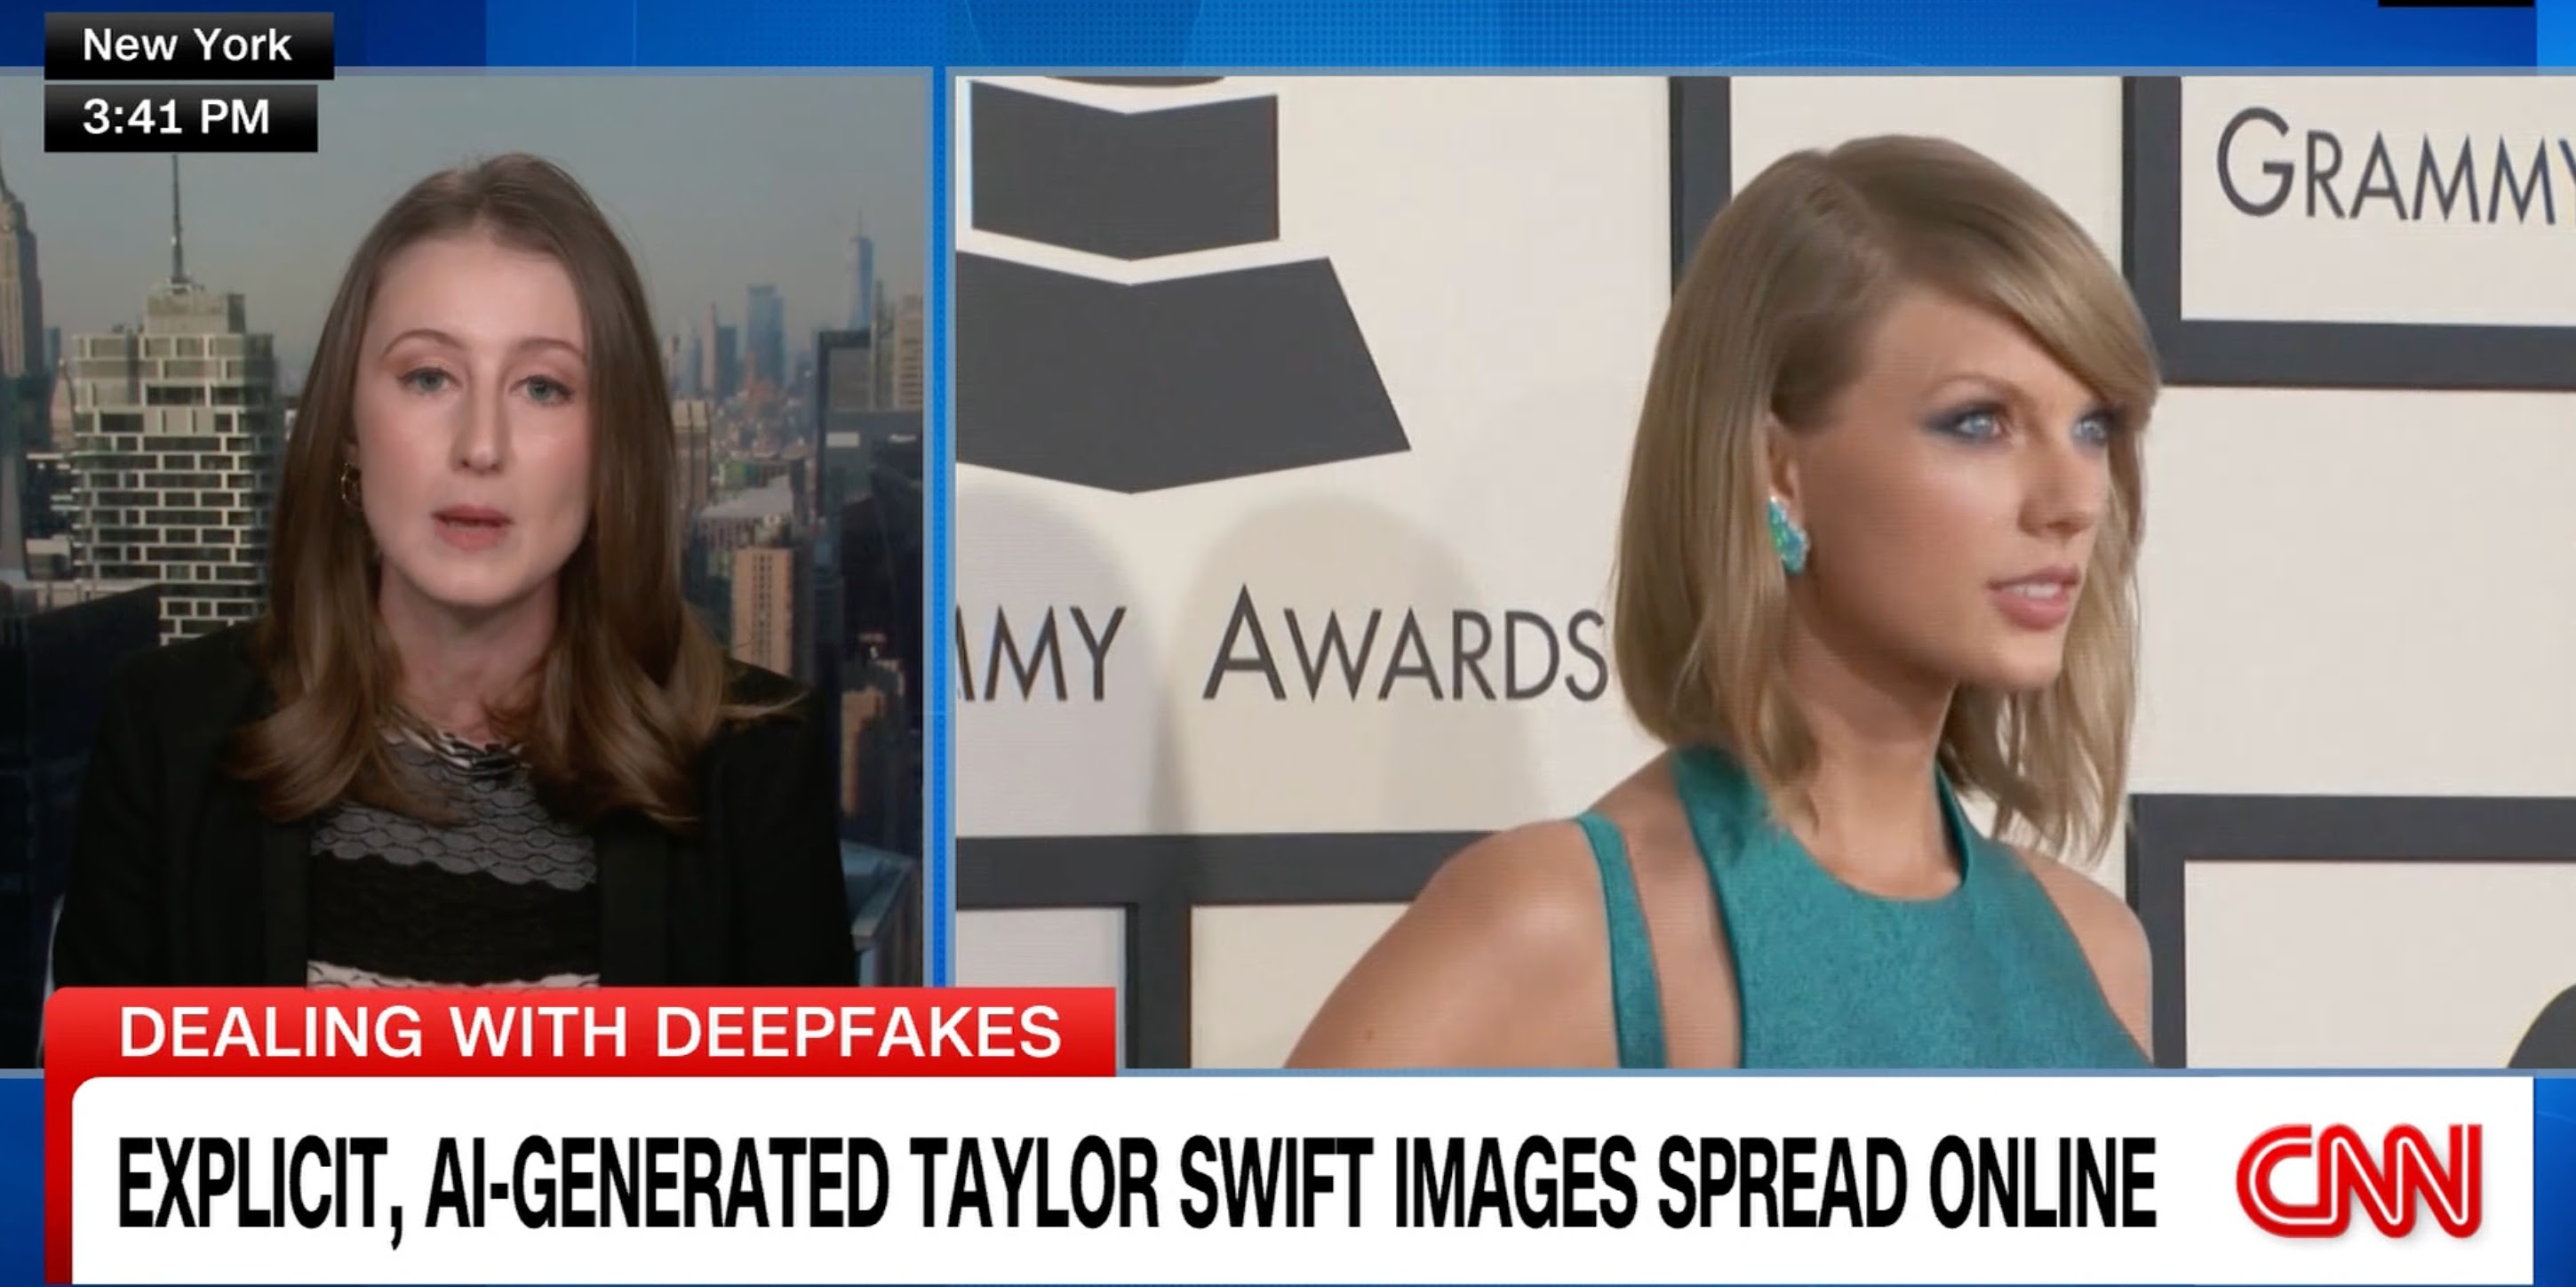 A CNN broadcast showing a photo of Taylor Swift at the Grammy Awards with the headline ''EXPLICIT, AI-GENERATED TAYLOR SWIFT IMAGES SPREAD ONLINE''